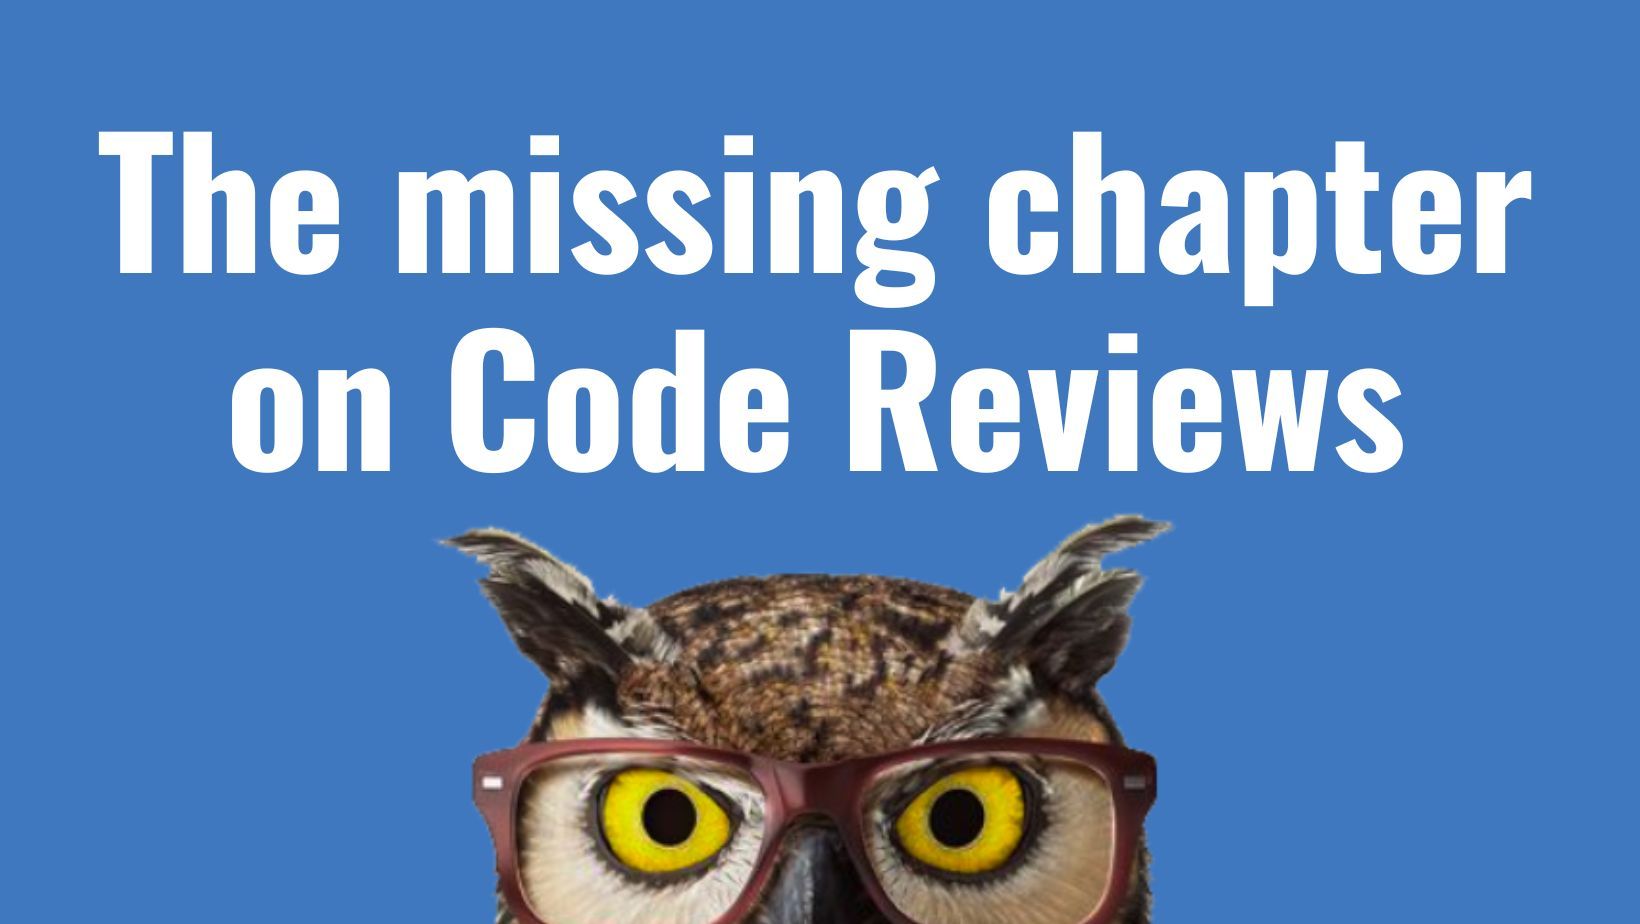 The missing chapter of Code Reviews